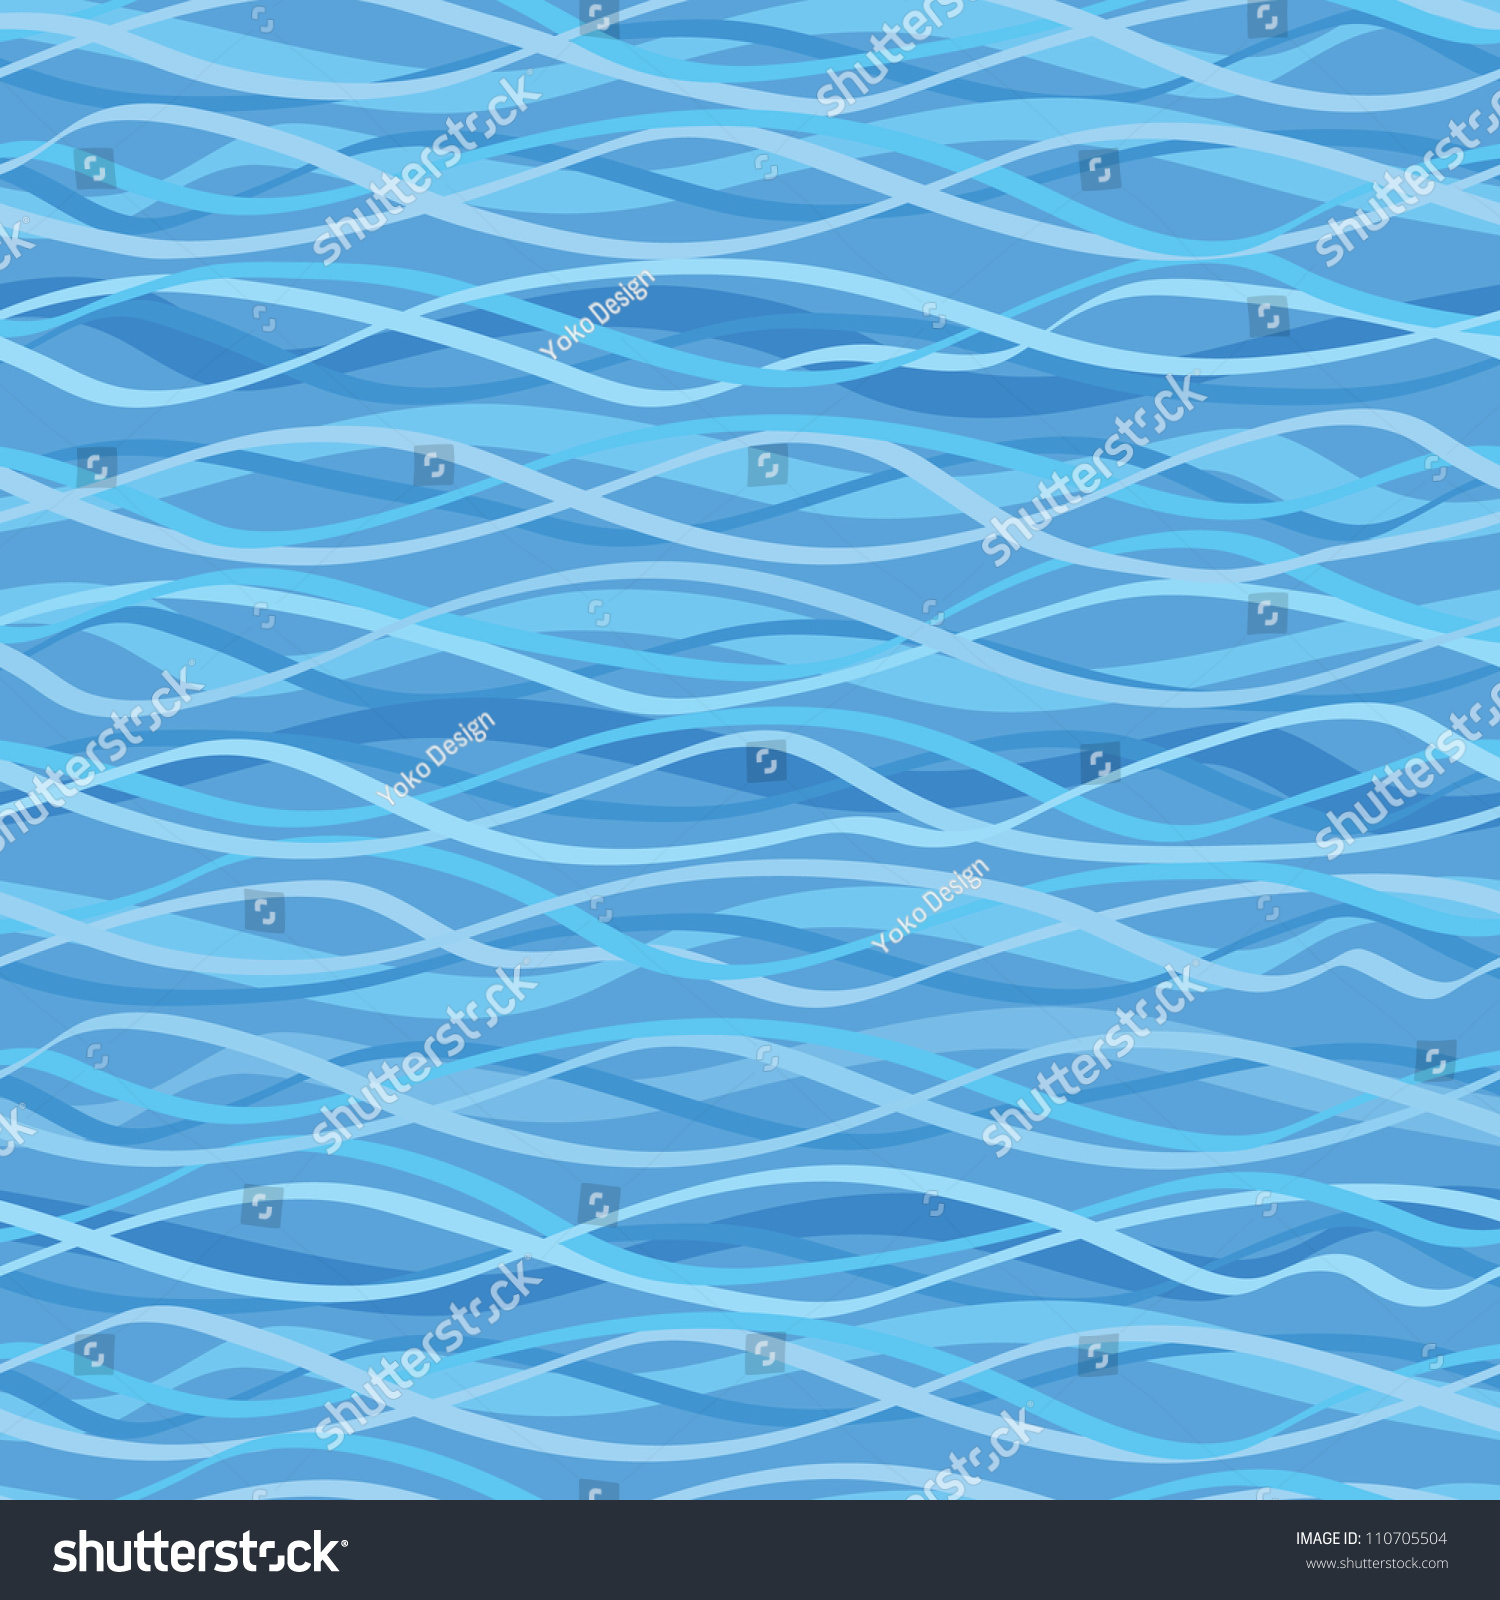 Abstract Wave Pattern. Waves Seamless Texture. Marine ...
 Ocean Water Pattern